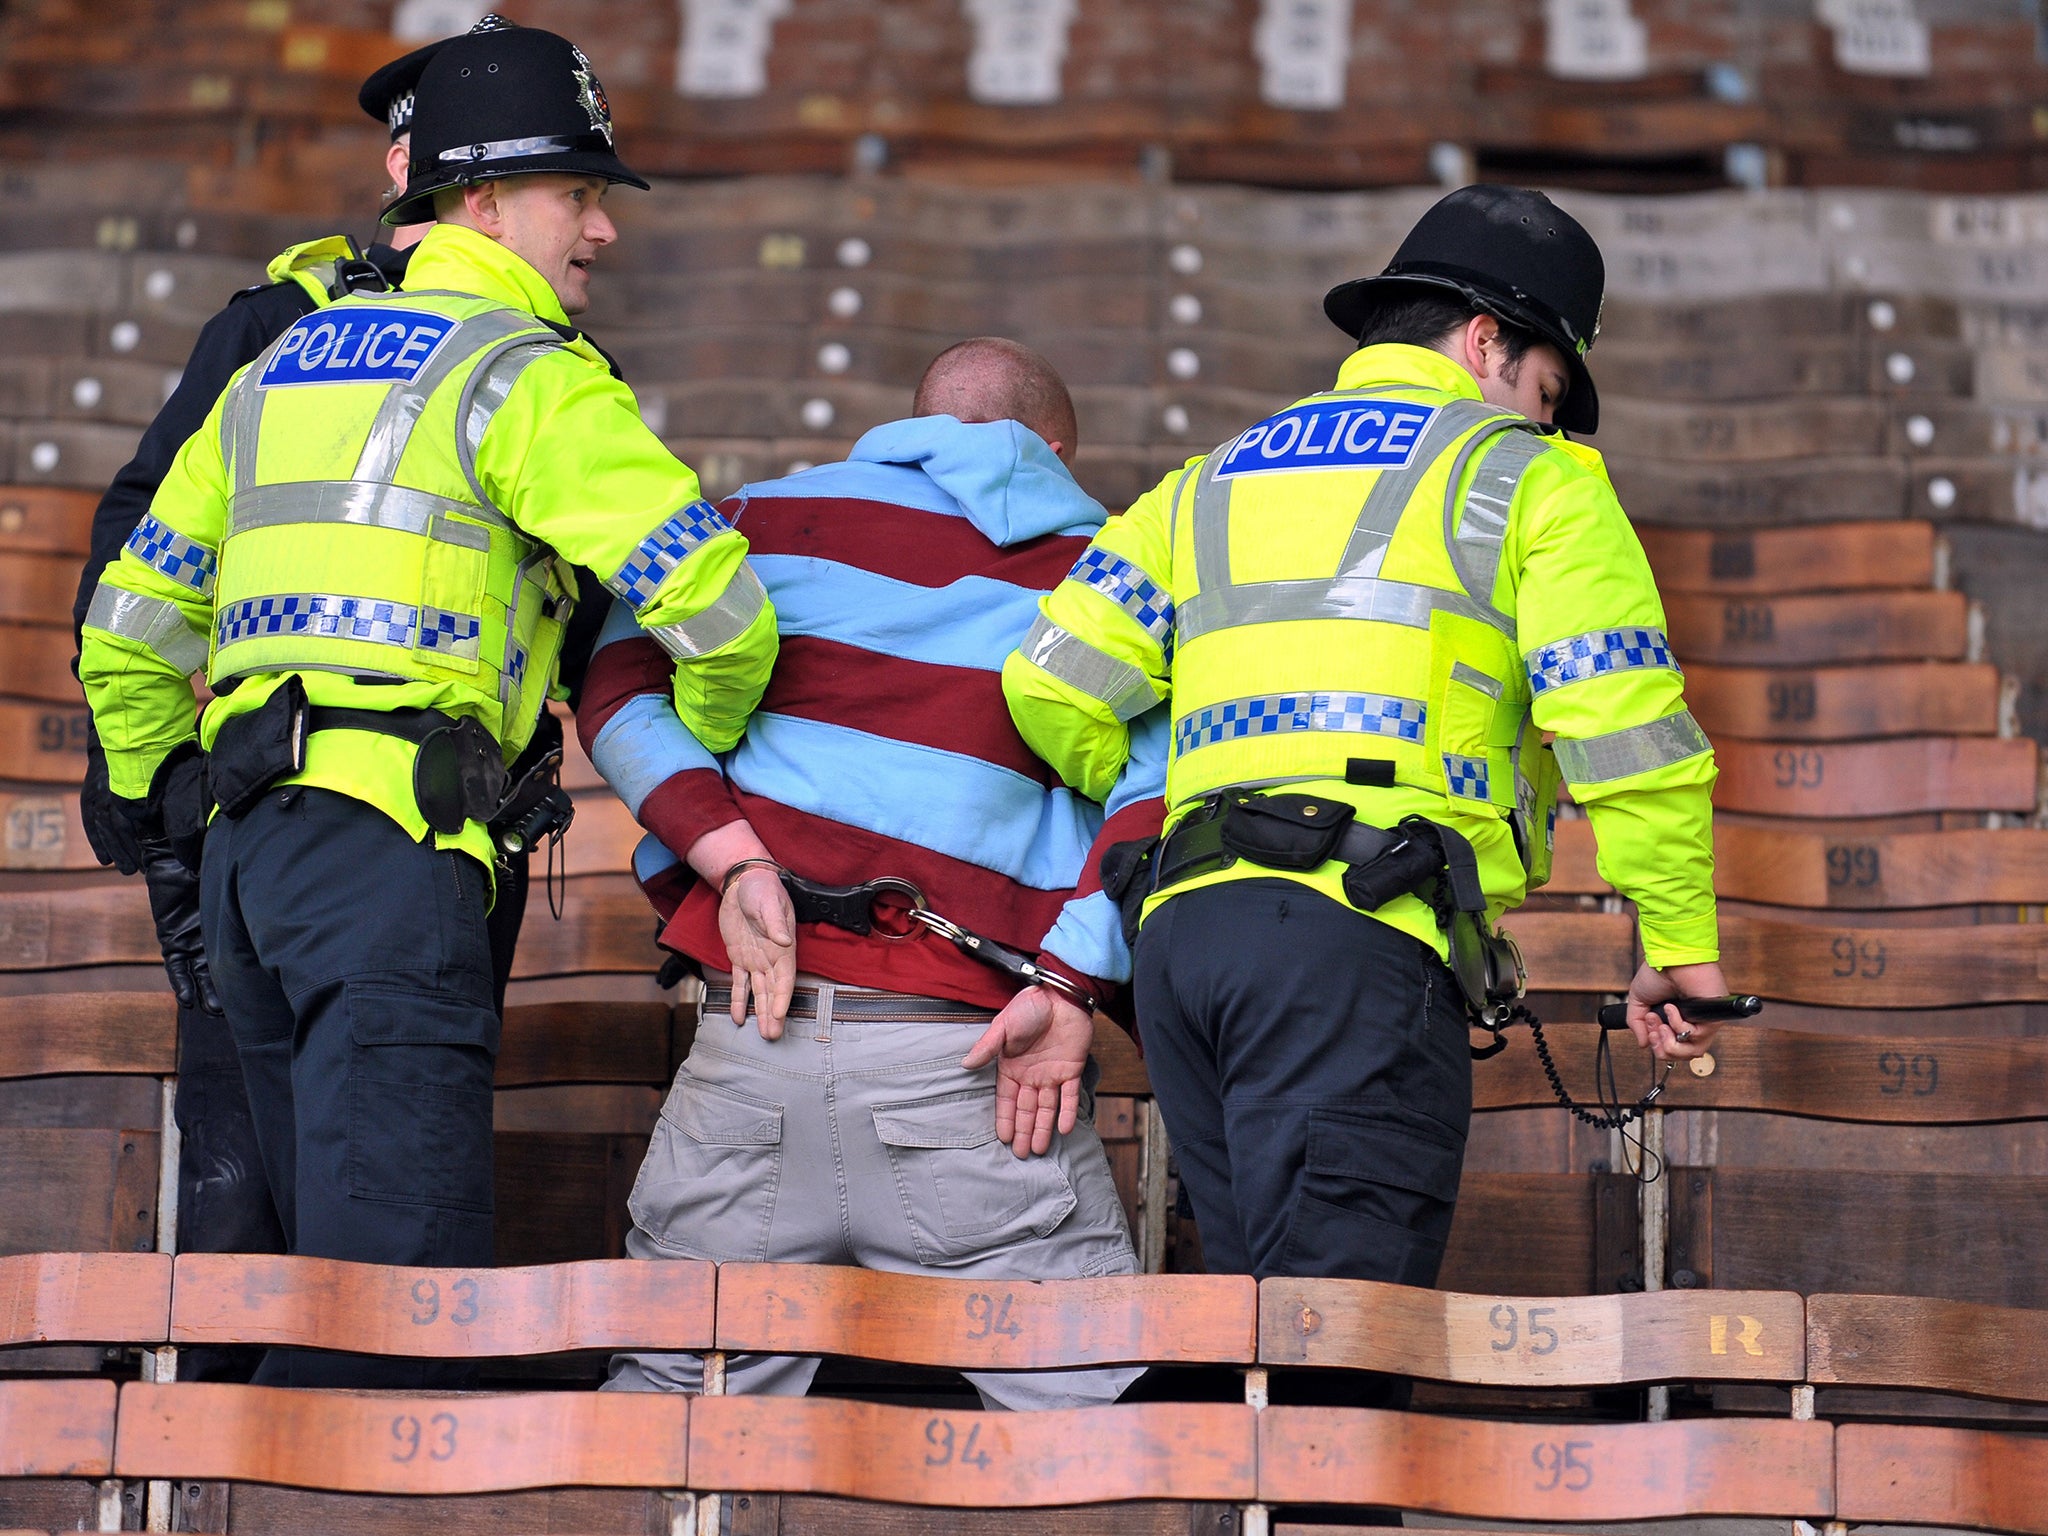 A Burnley fan is led away in handcuffs by police after
crowd trouble during a Premier League game in 2010